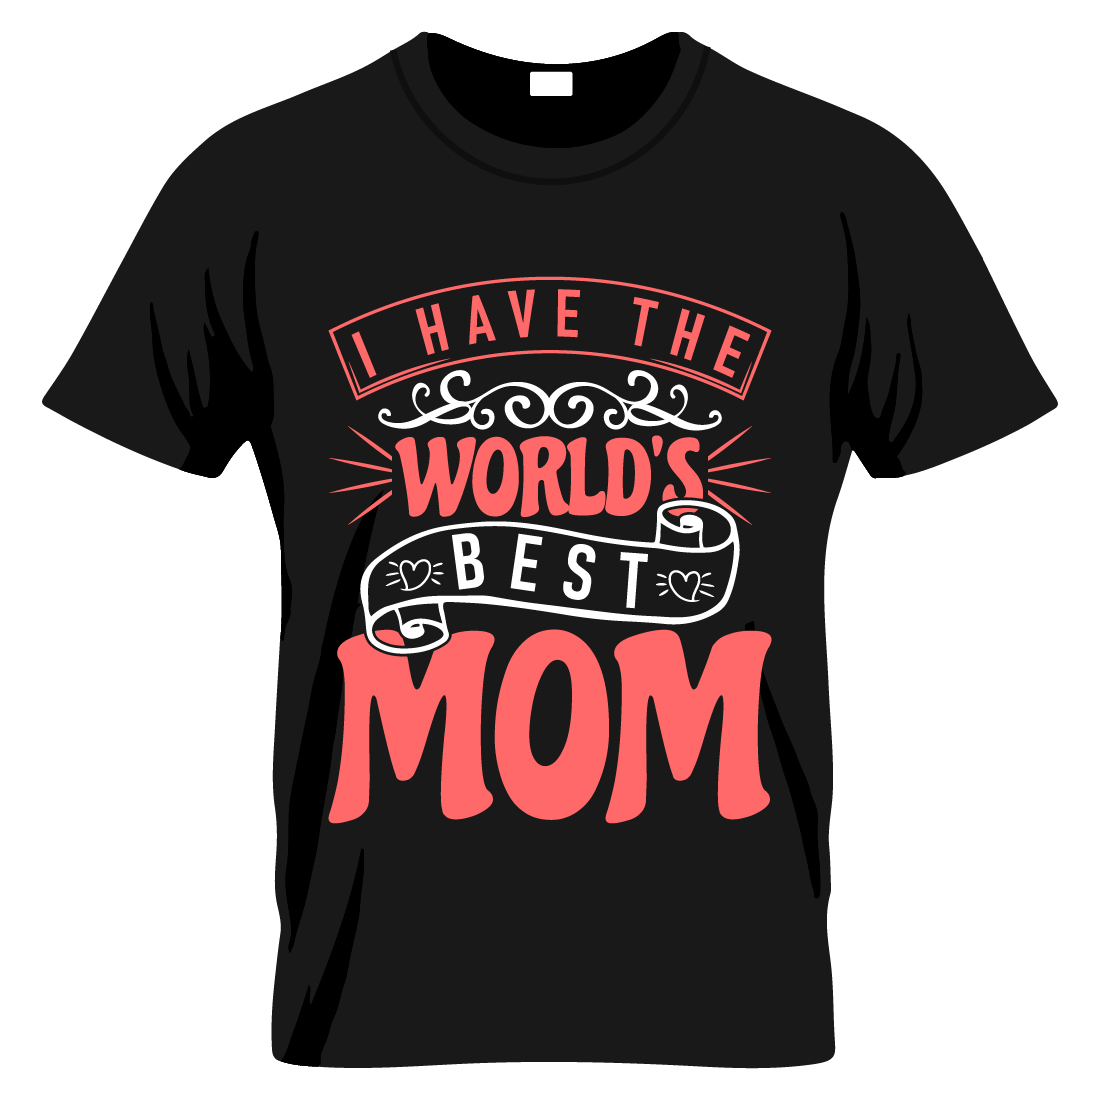 The world best mom t shirt cover image.